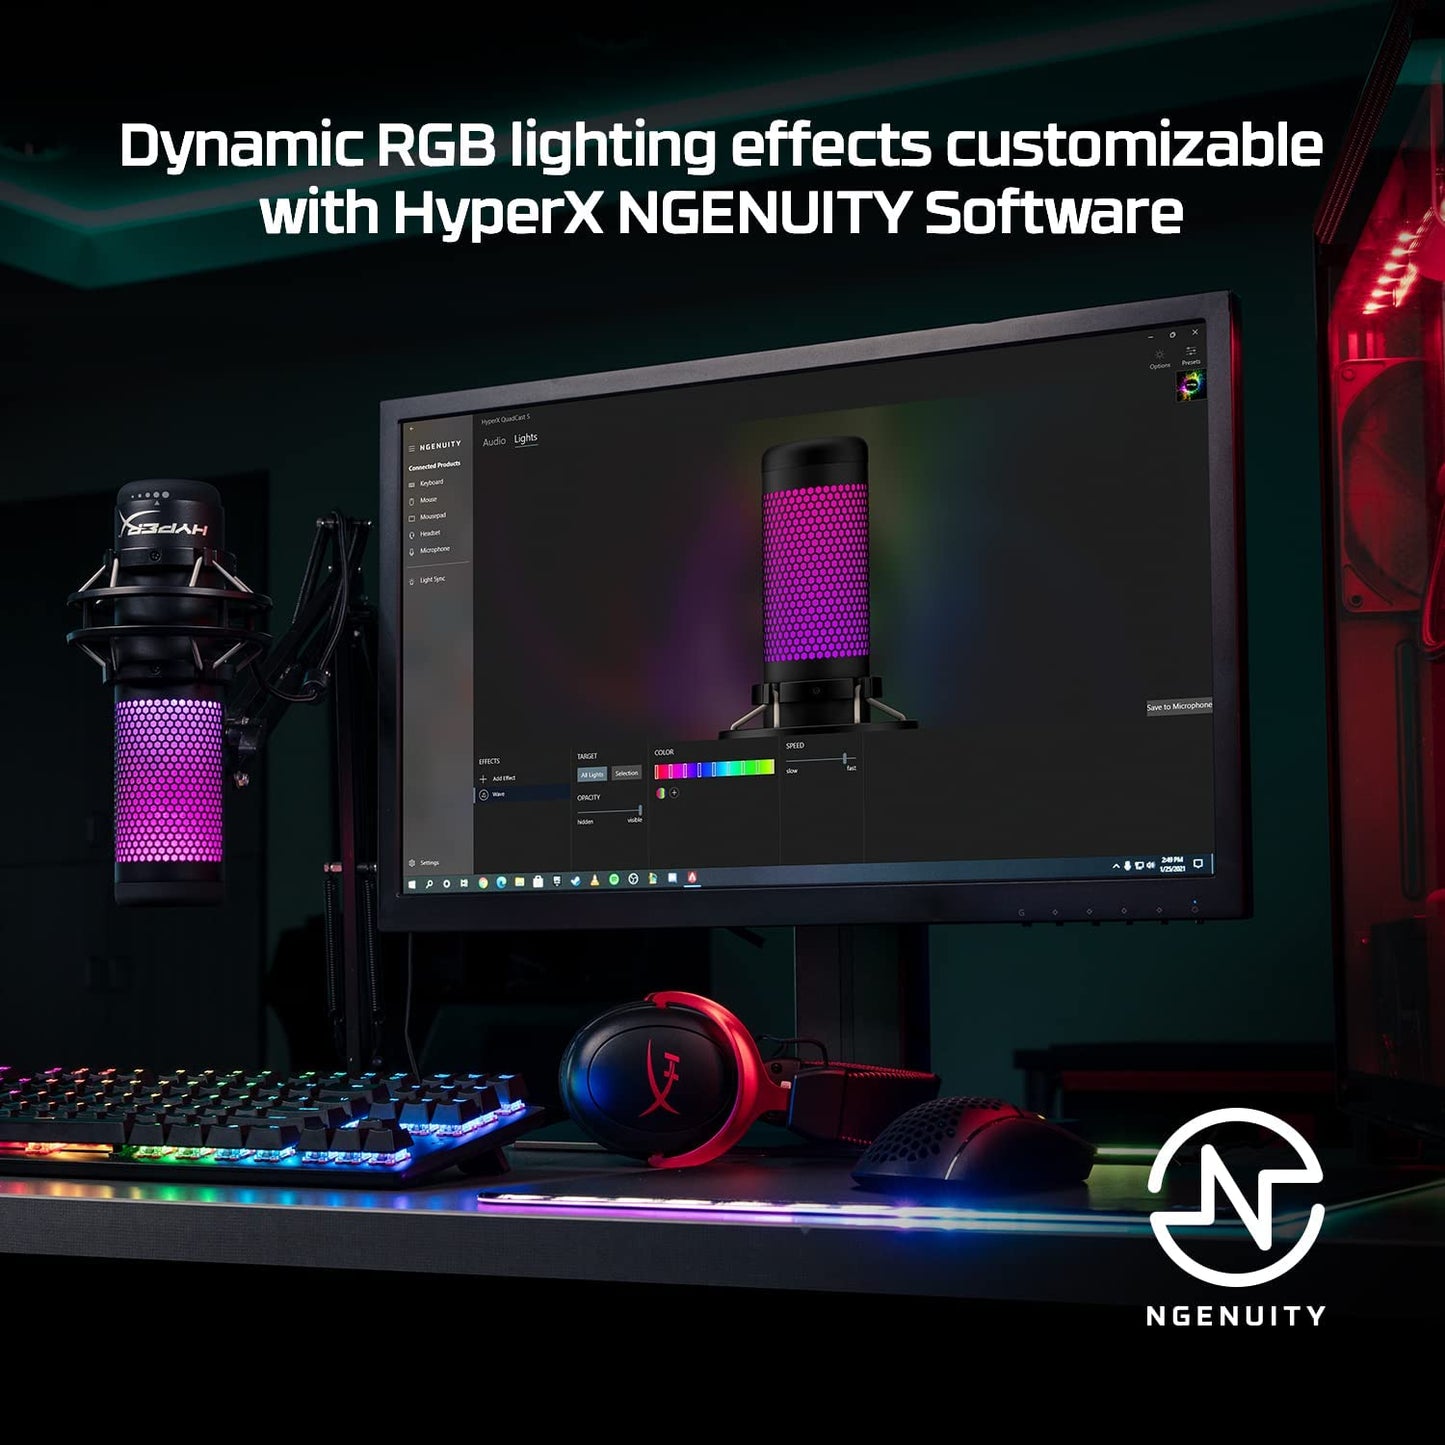 HyperX QuadCast S – RGB USB Condenser Microphone for PC, PS4, PS5 and Mac